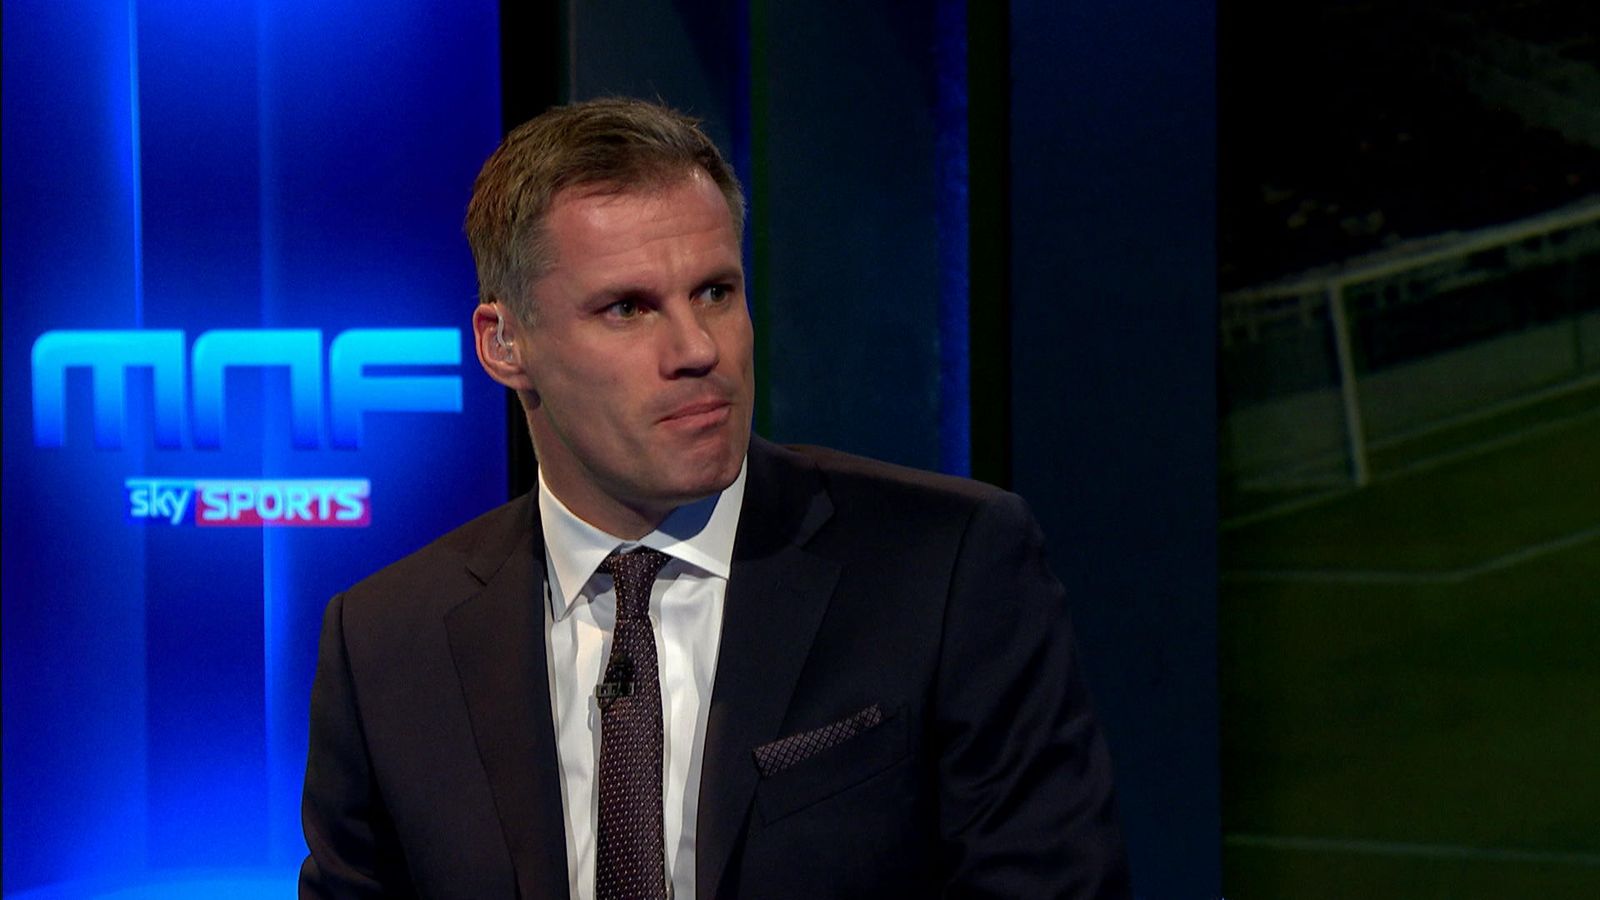  Jamie Carragher is pictured as a pundit on Monday Night Football discussing Everton and Dele Alli.